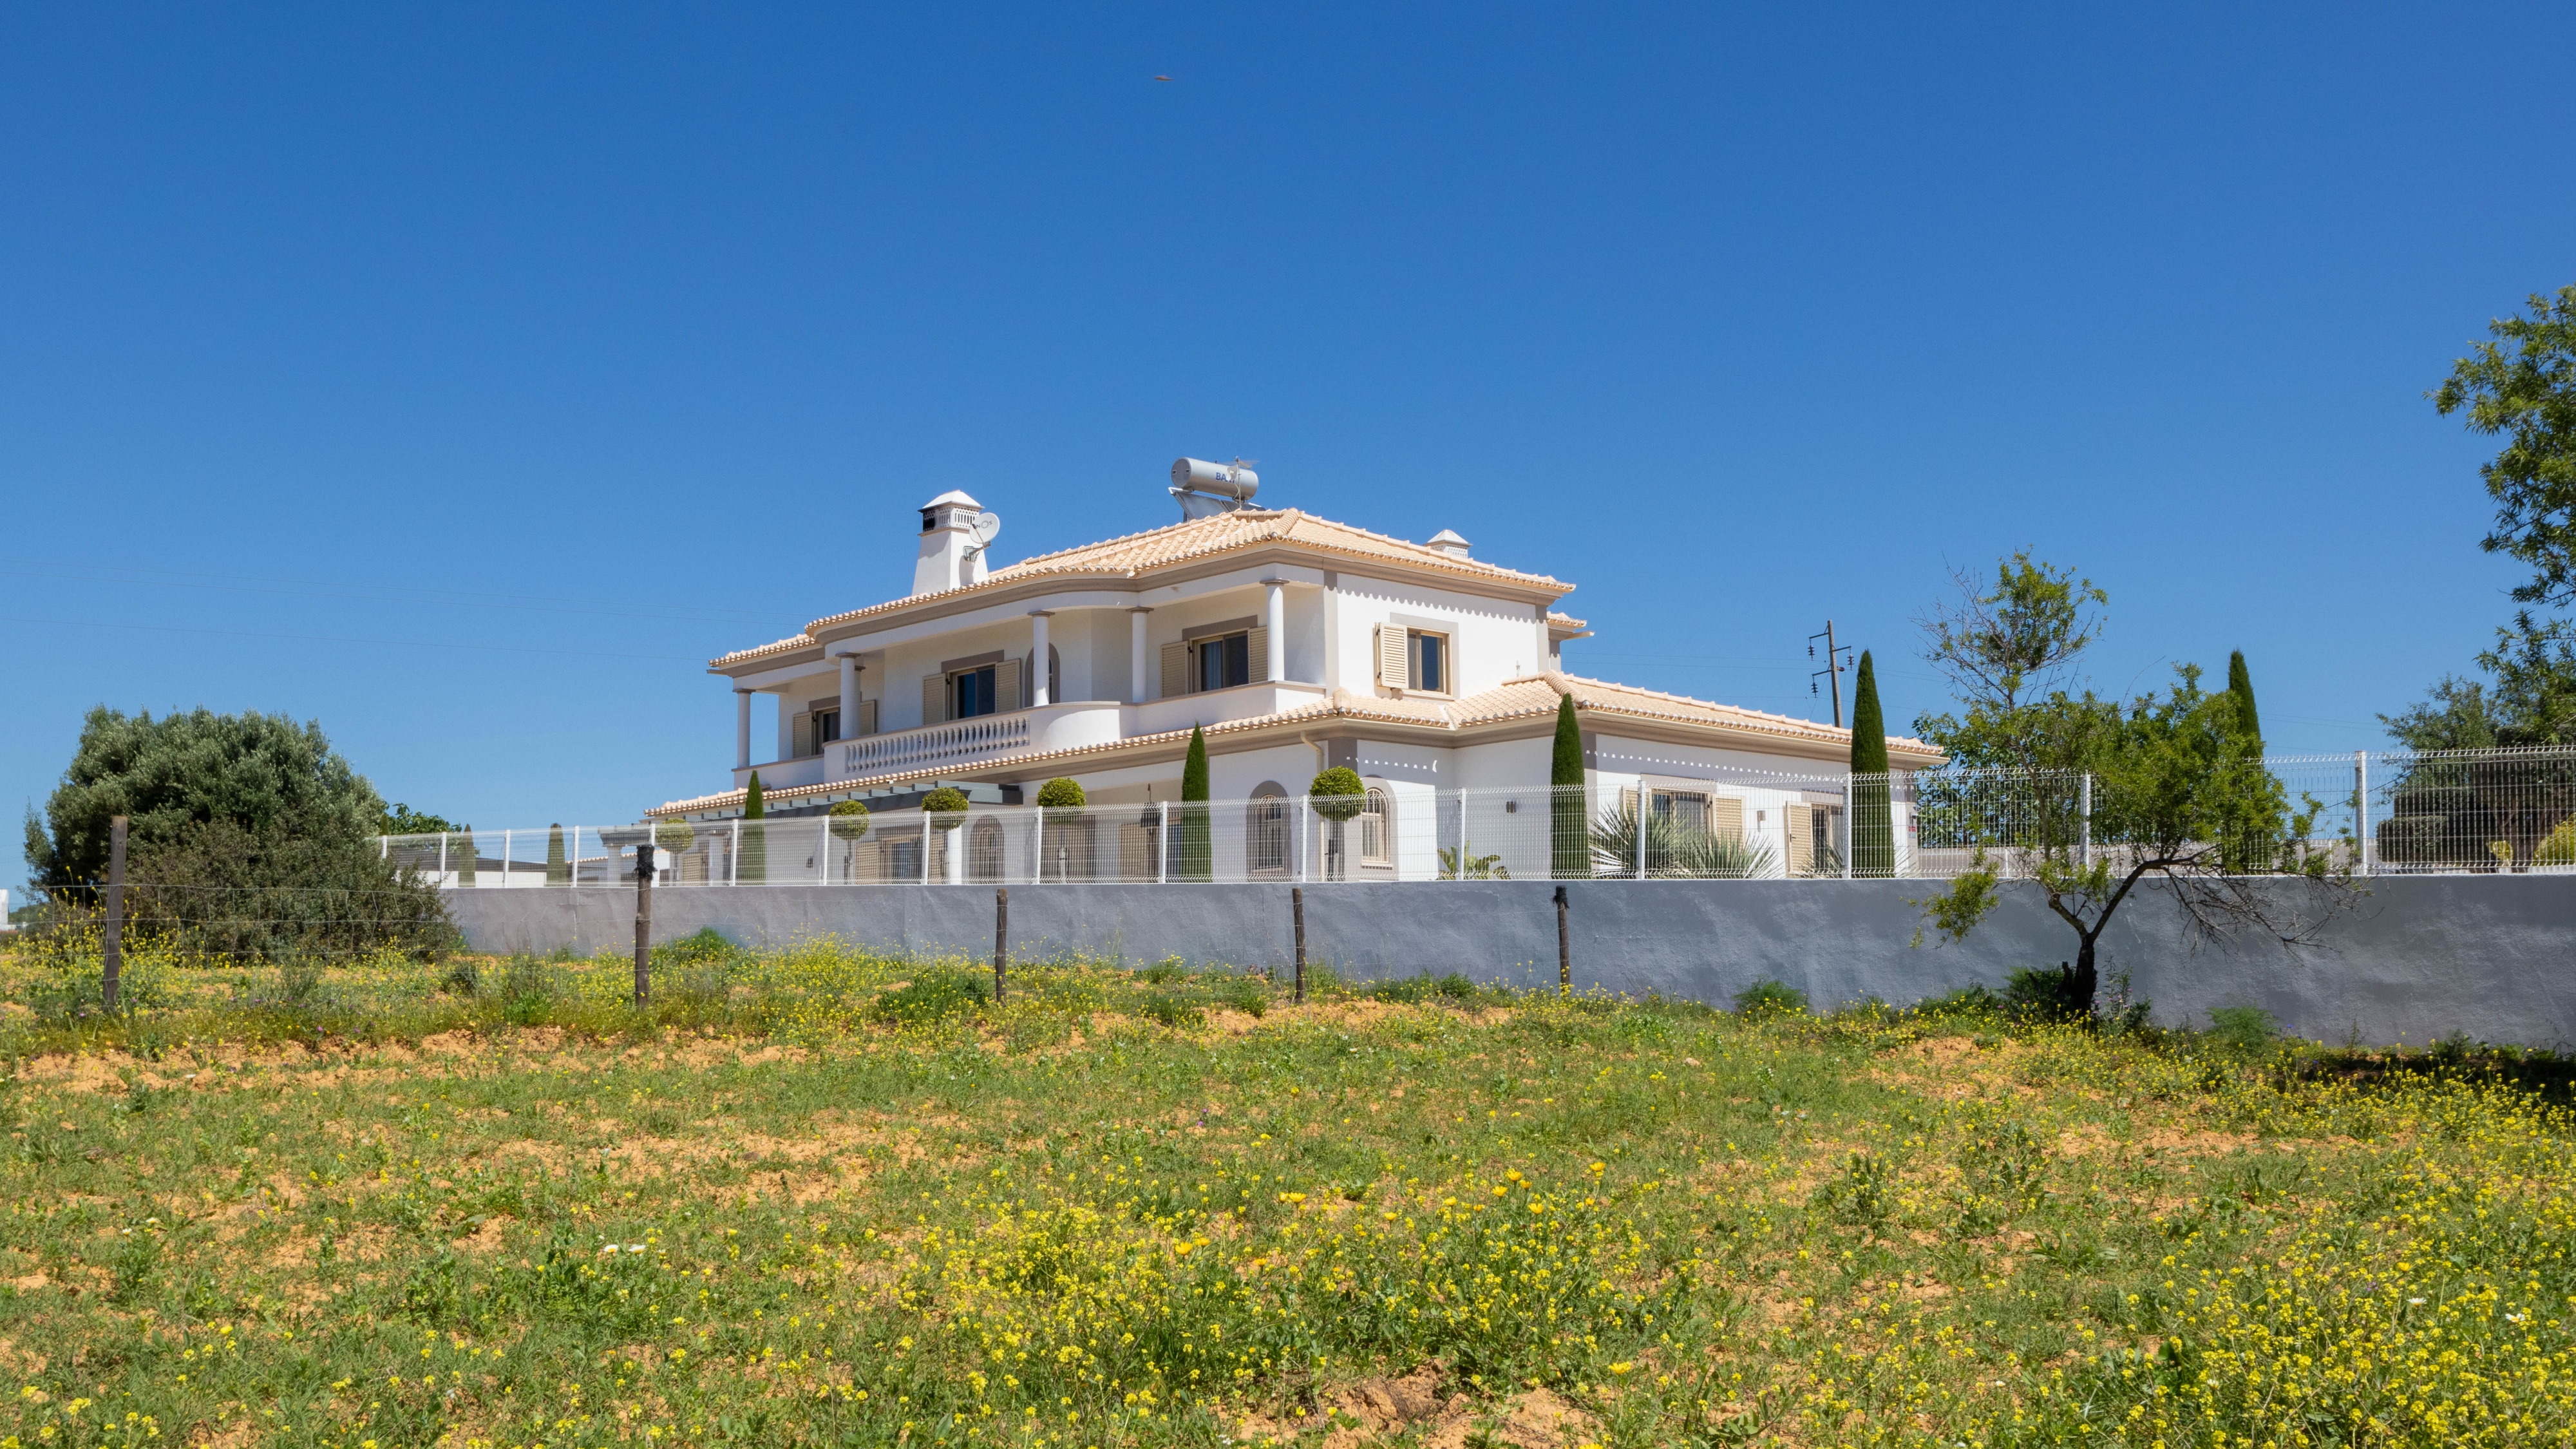 4 Bedroom Elegant Villa with Beautiful Interior, Guia, Central Algarve | VM2236 This is a spectacular and and impressive 4 bedroom, 5 bathroom villa, nestled in the outskirts of Guia, near Albufeira and the Algarve Shopping mall.